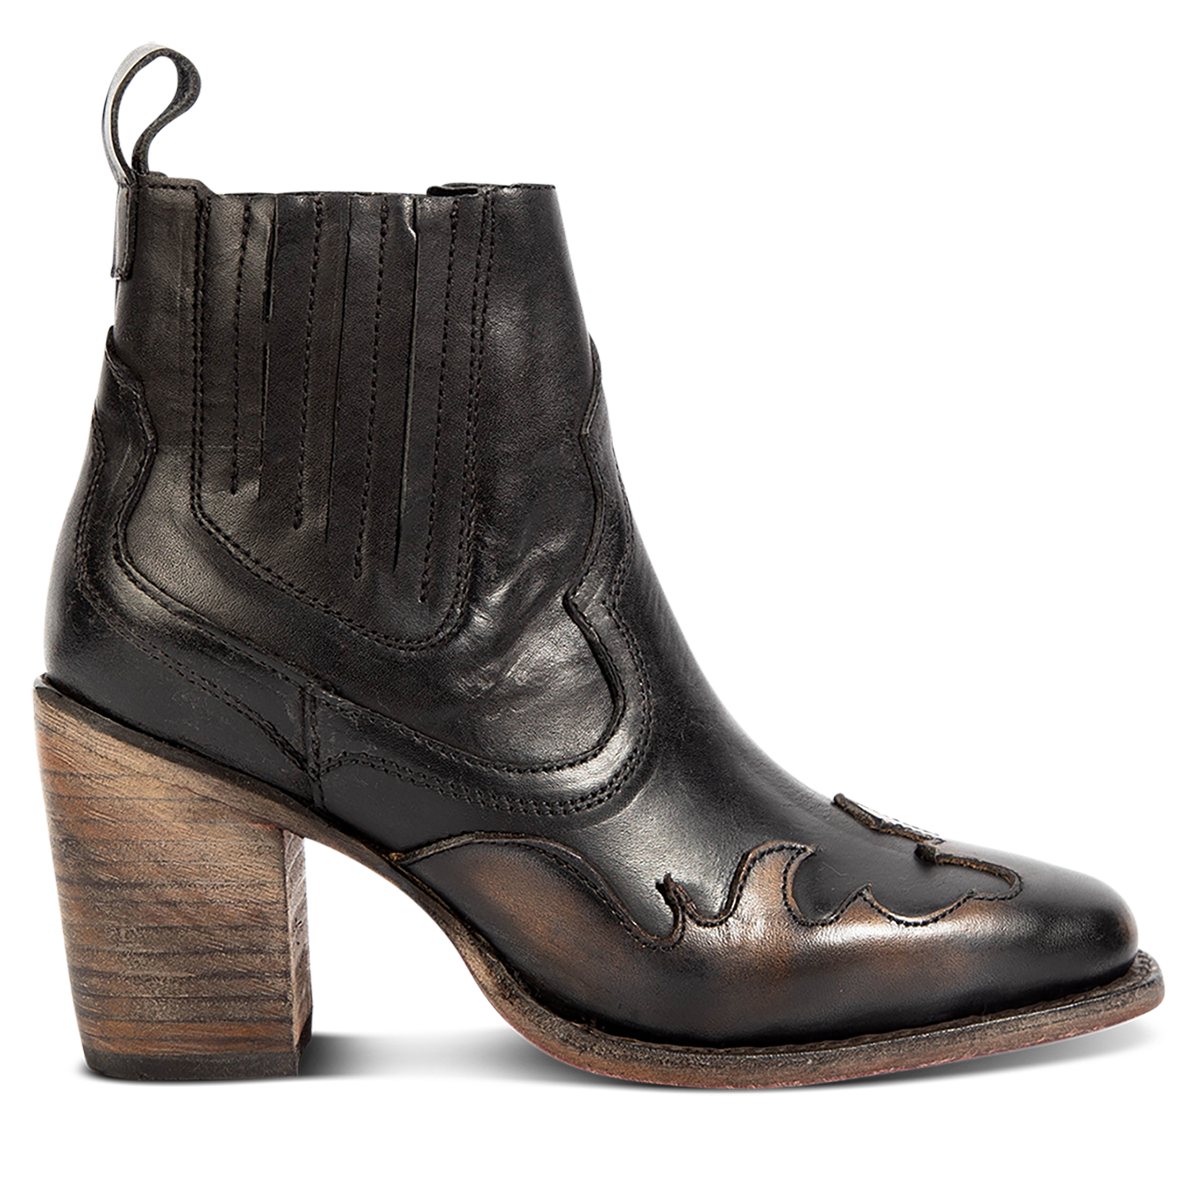 FREEBIRD women's Paula black multi contrast leather overlay bootie with gore detailing, stacked heel and heel leather pull tab